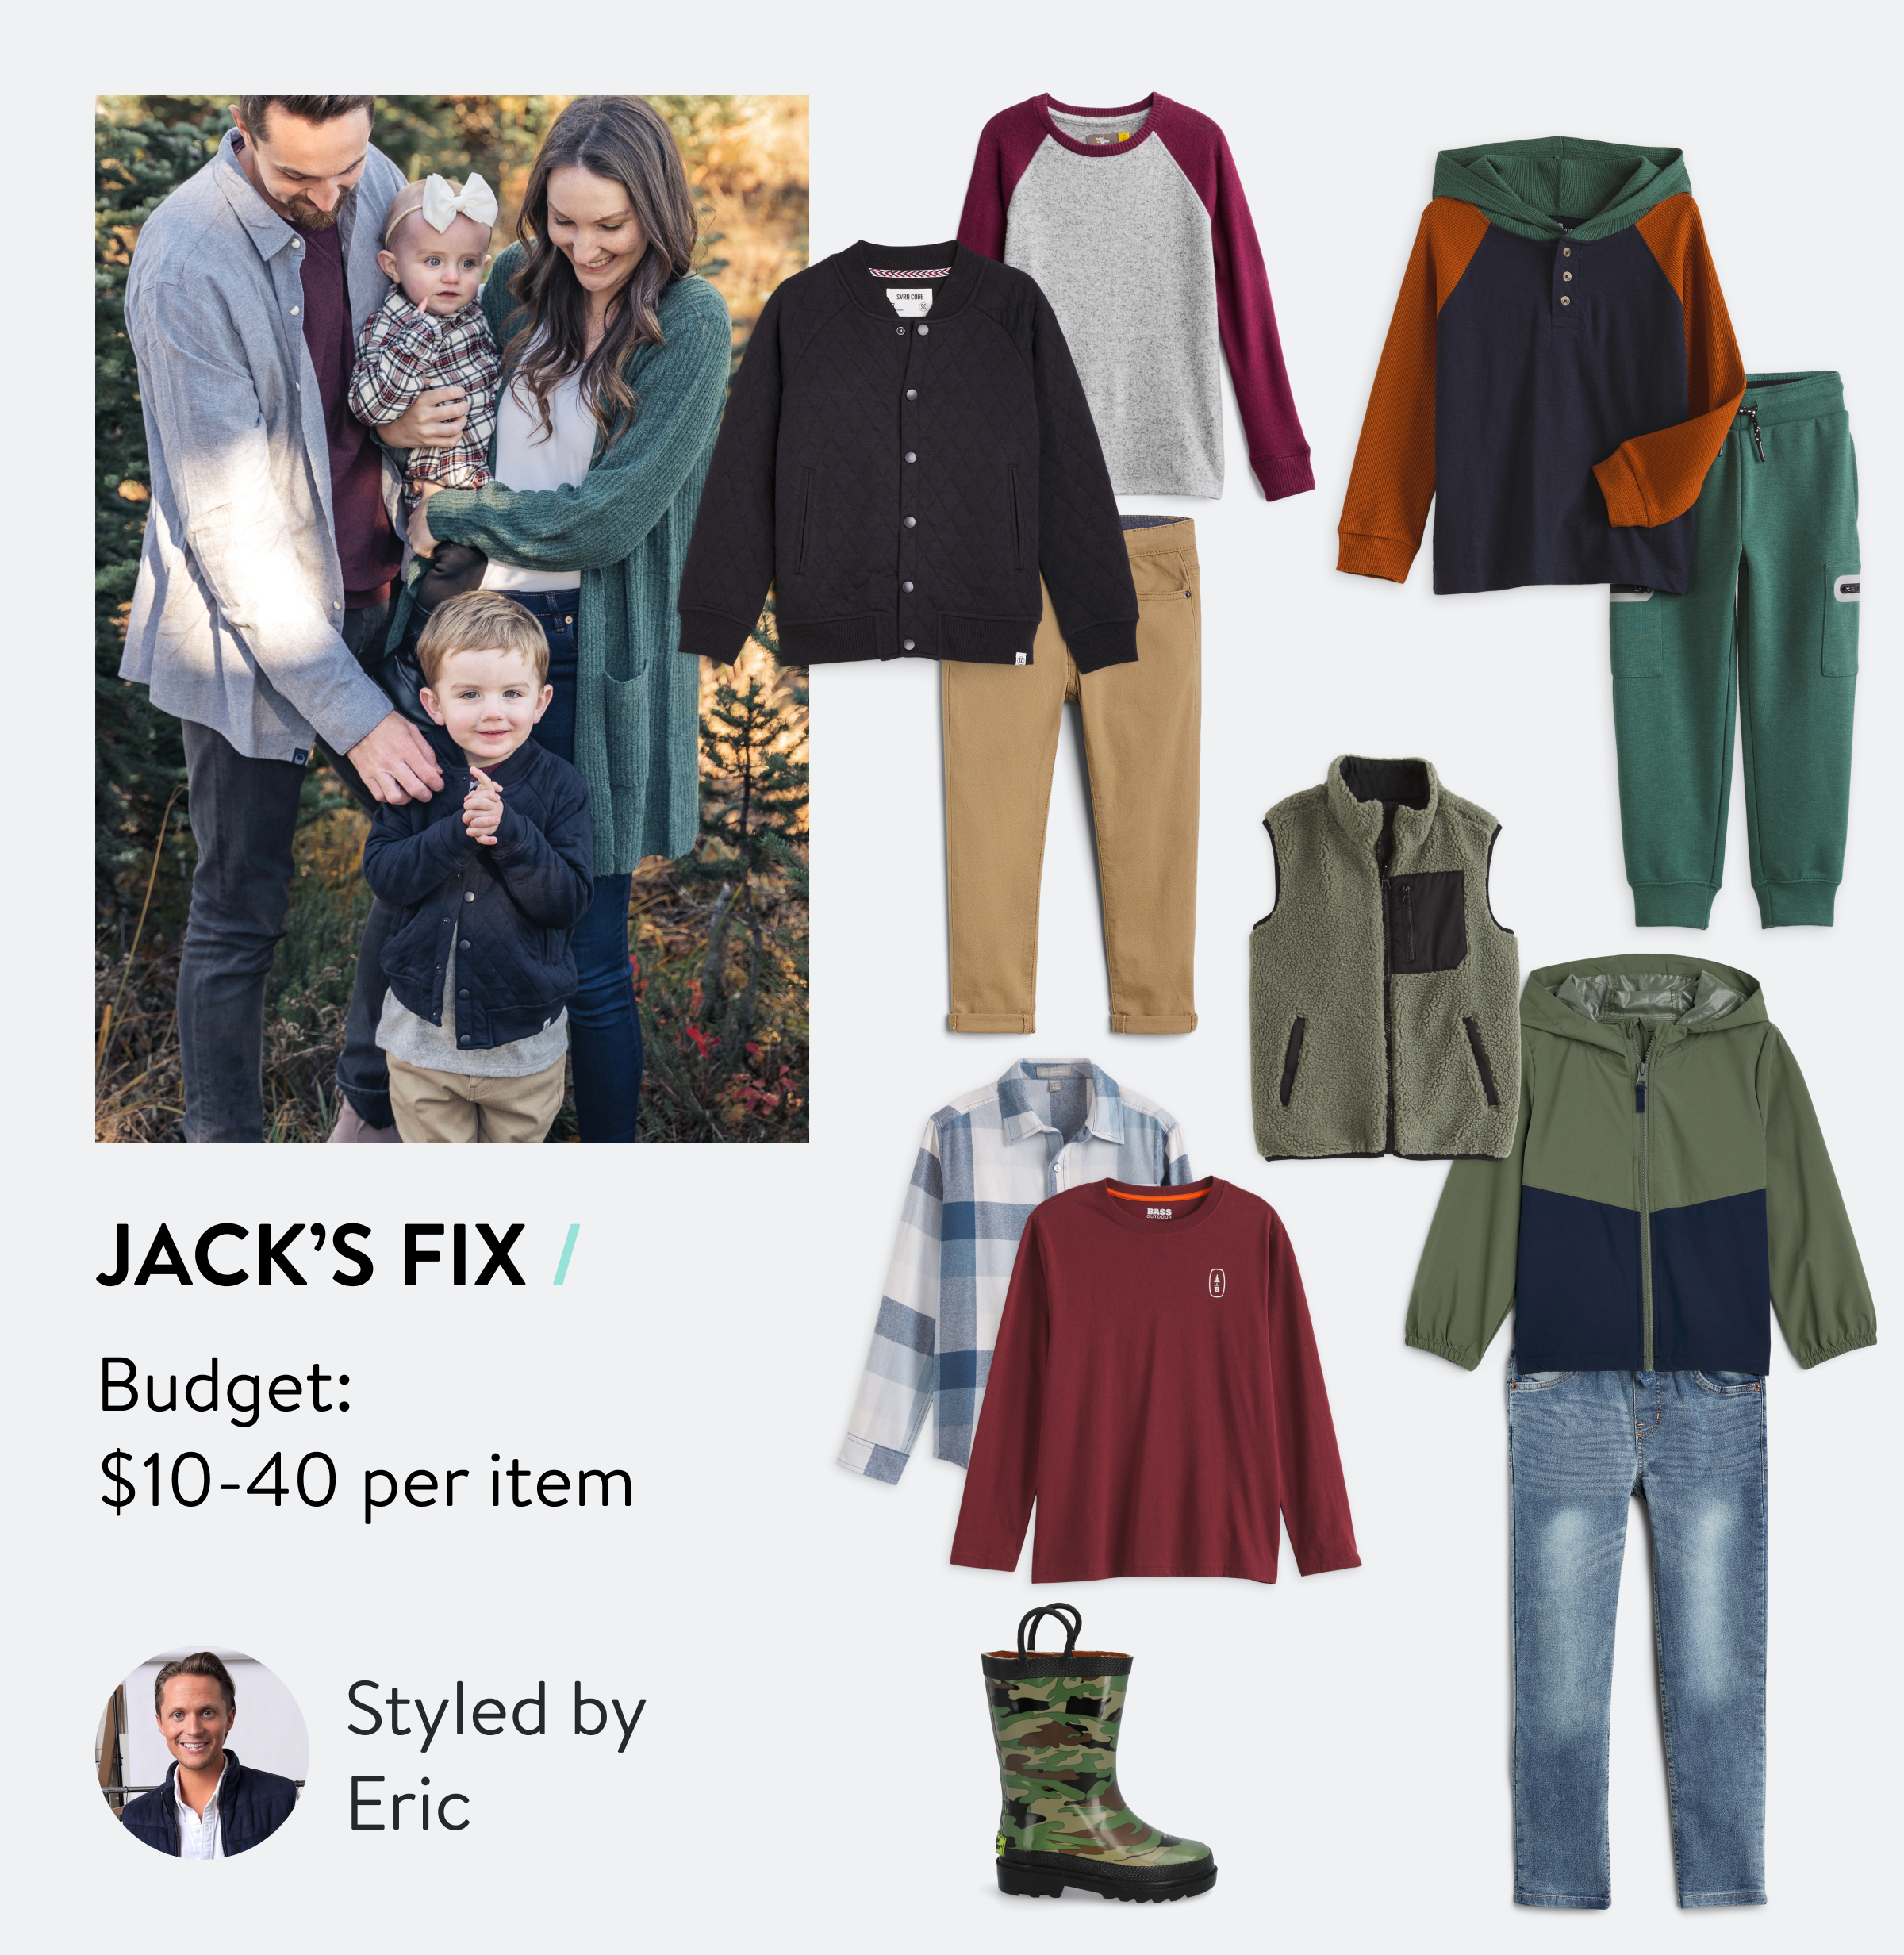 Introducing the latest ways we are making it even easier for you to  discover the things you love with Shop - Stitch Fix Newsroom